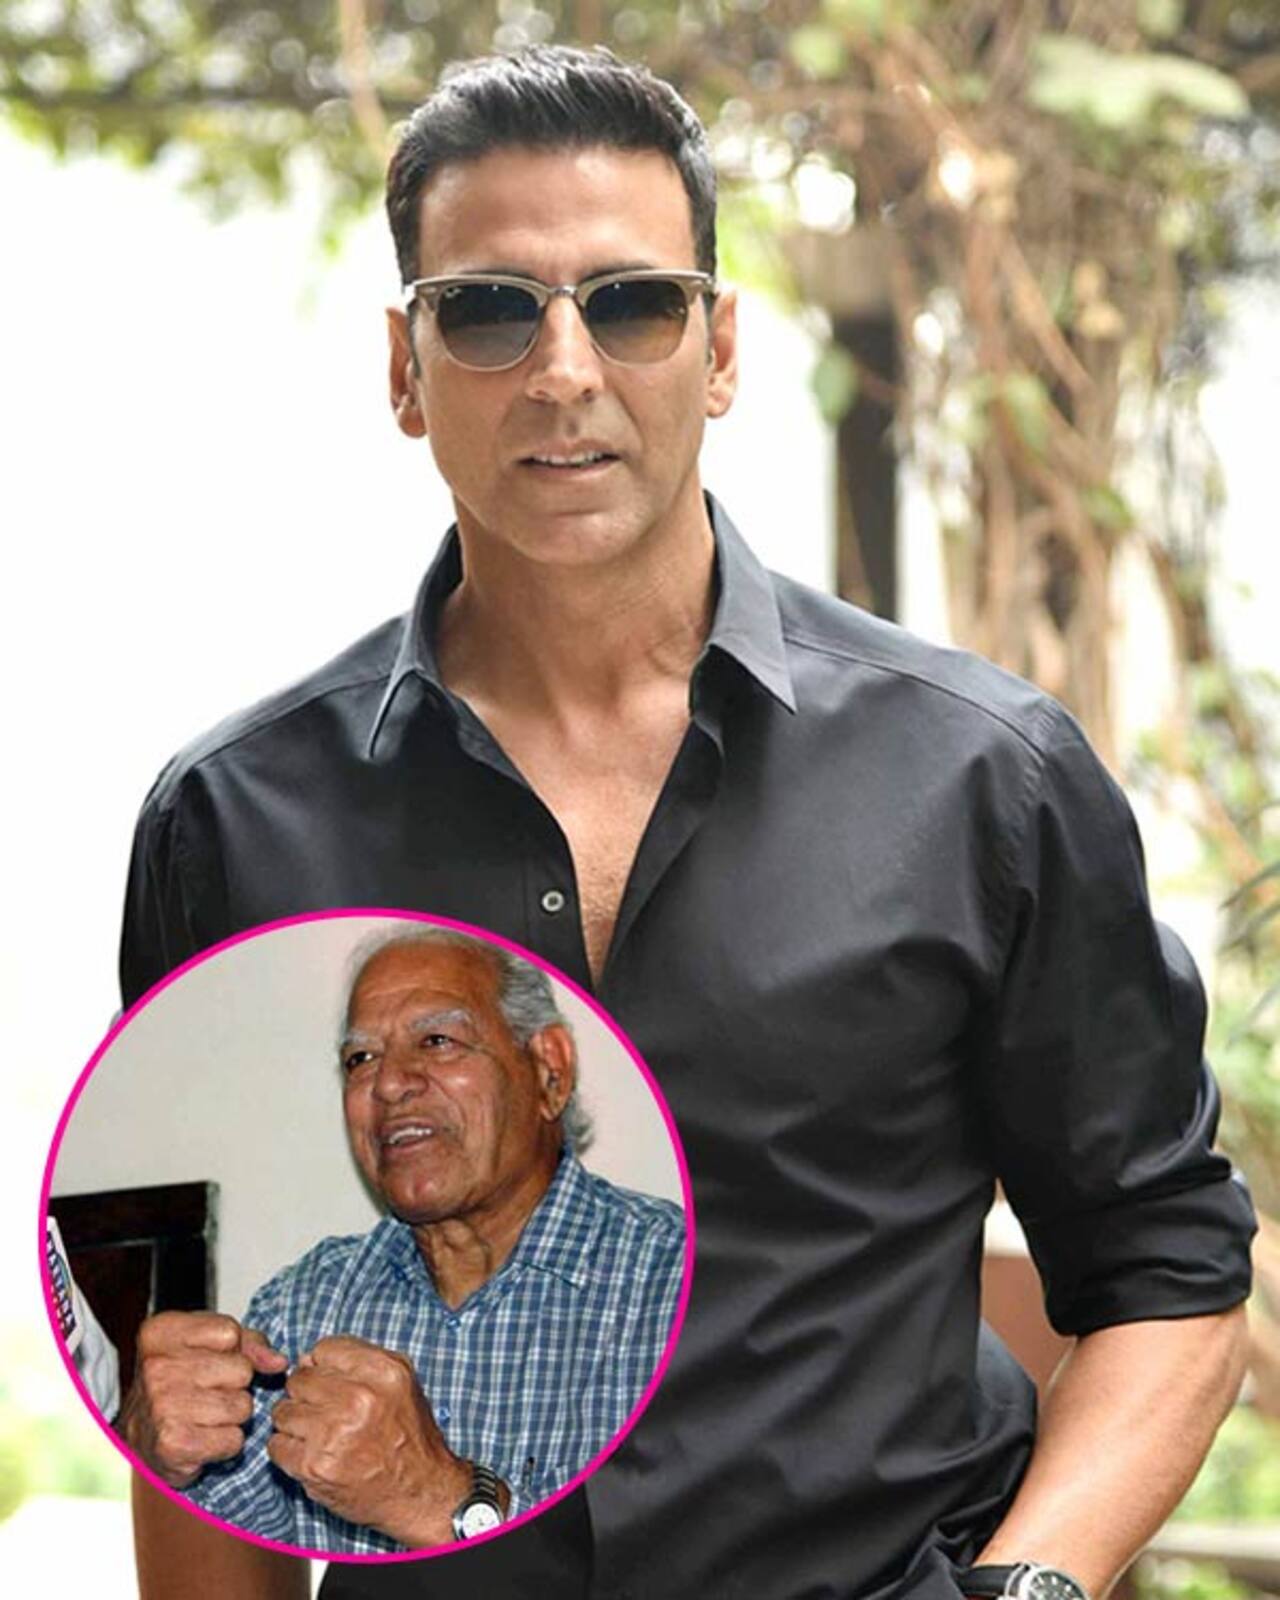 Akshay Kumar: I would like to play the role of Dara Singh in his biopic